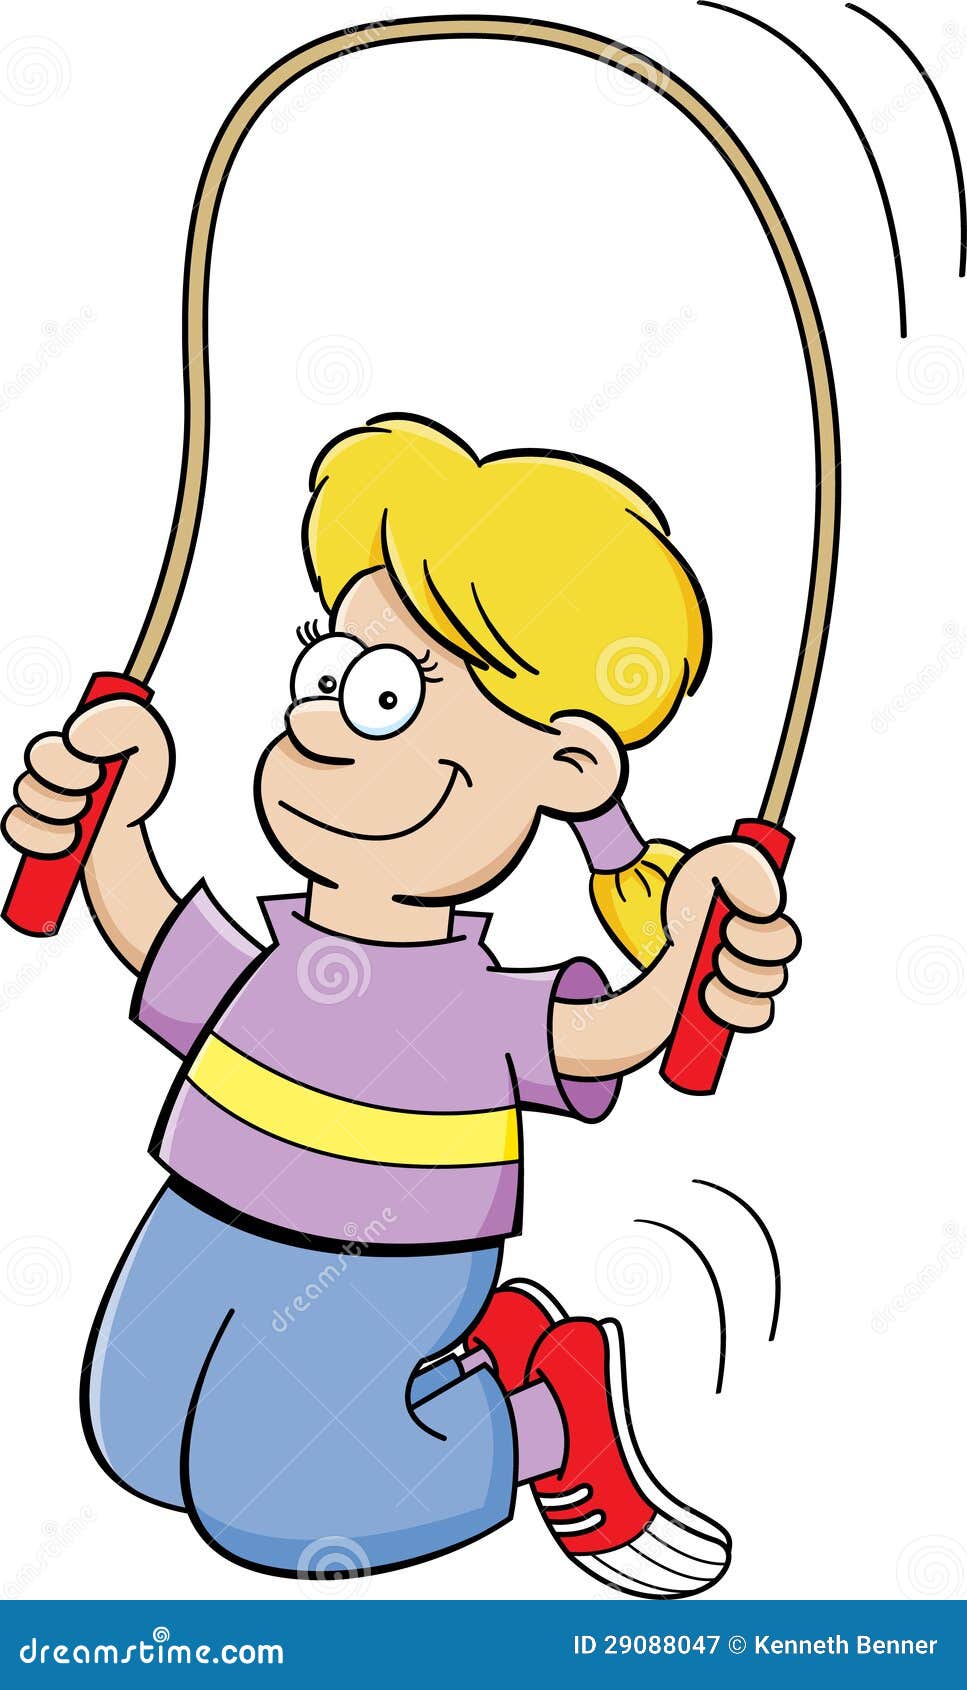 animated clip art jumping rope - photo #36